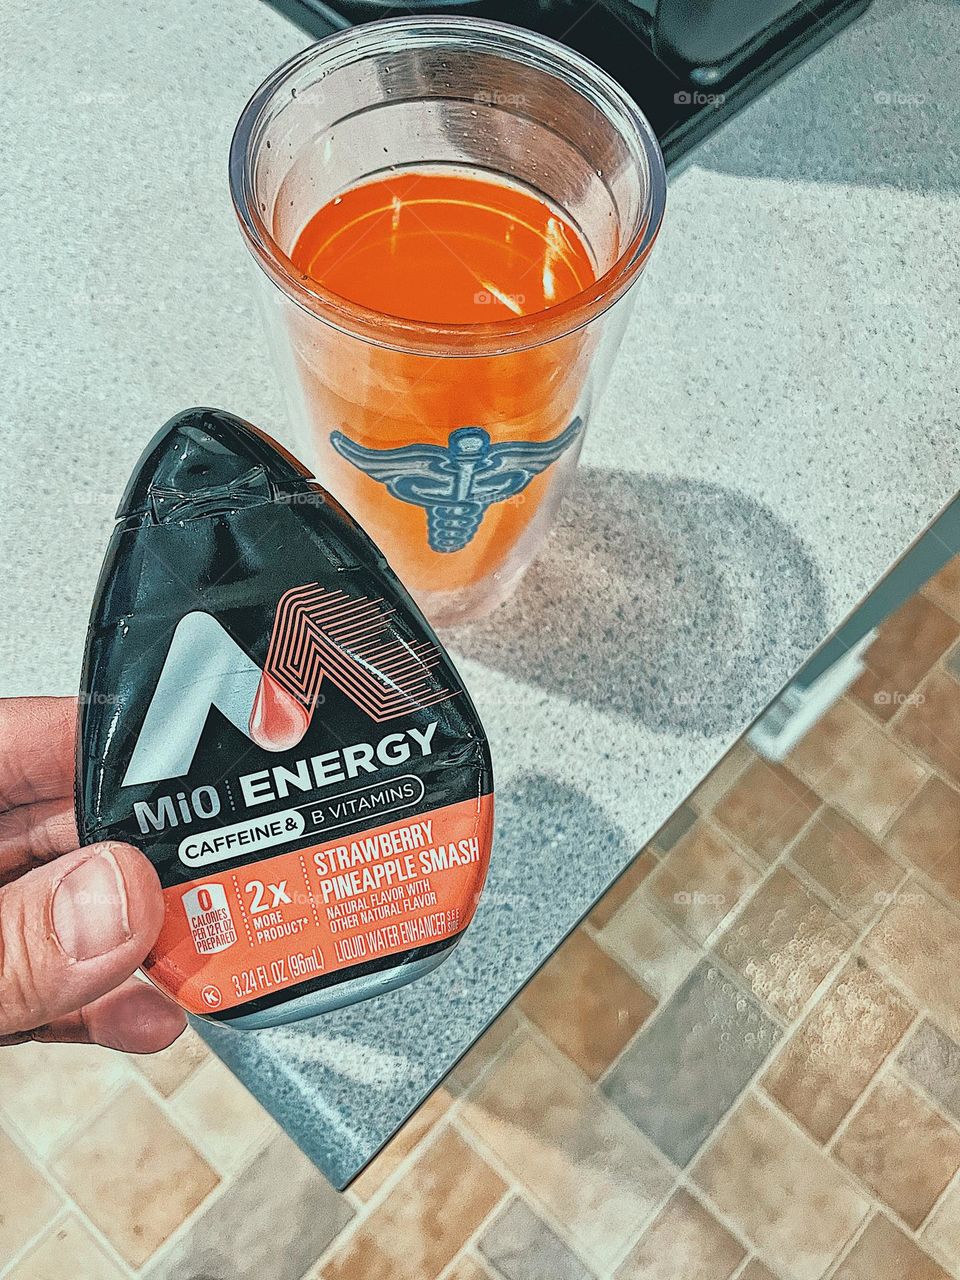 Woman making a Mio Energy water drink, woman using Mio Energy water drops to make a drink in a glass, making a healthy summertime drink, woman’s hand holding Mio Energy water drops, H2O Energy drops, healthy caffeine alternatives 